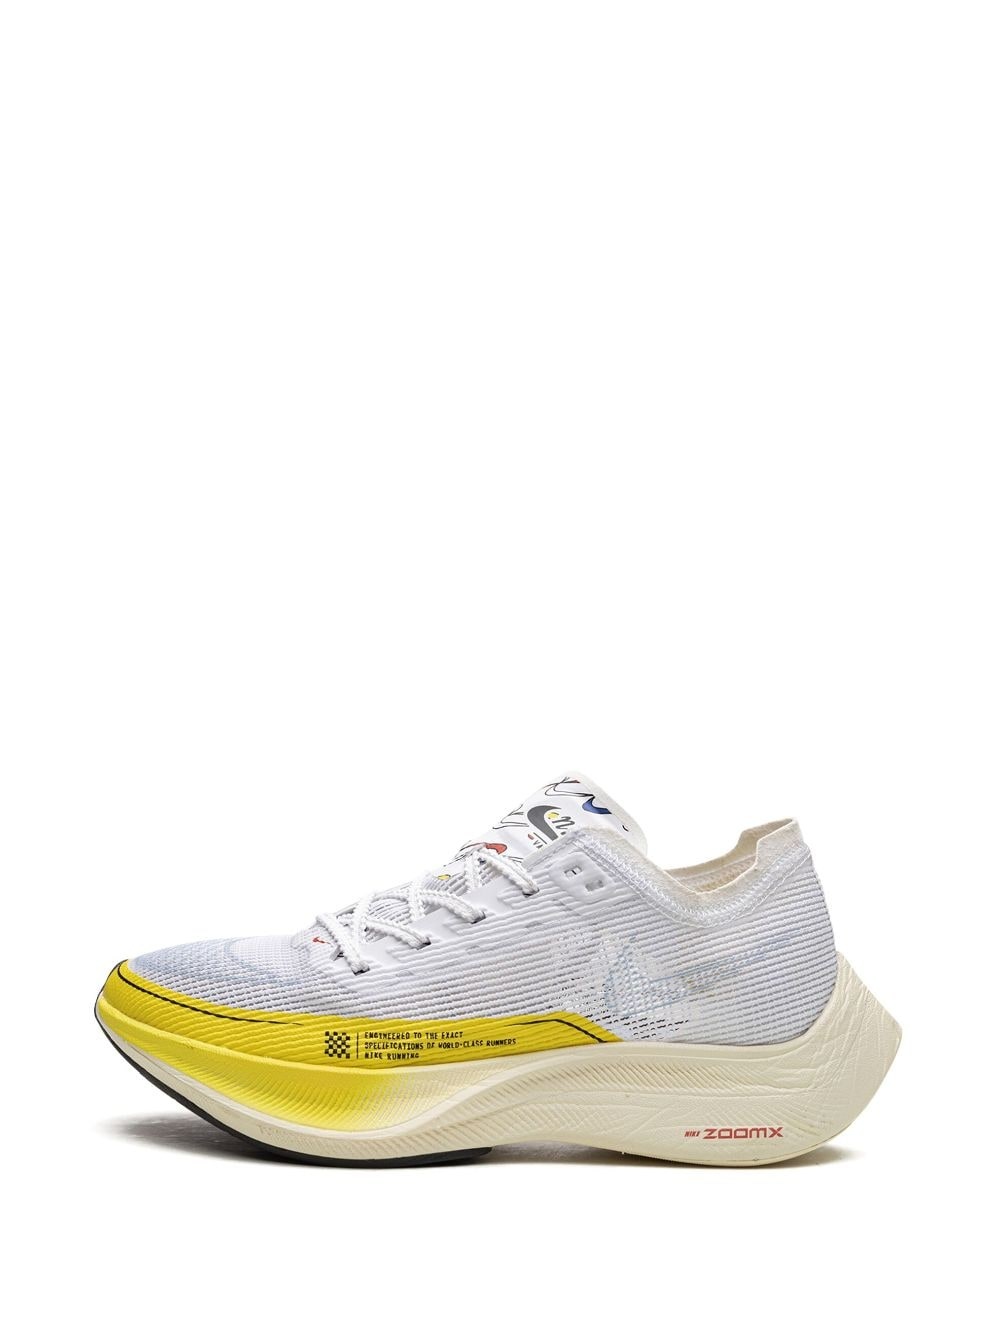 Zoomx Vaporfly Next% 2 sneakers - 5